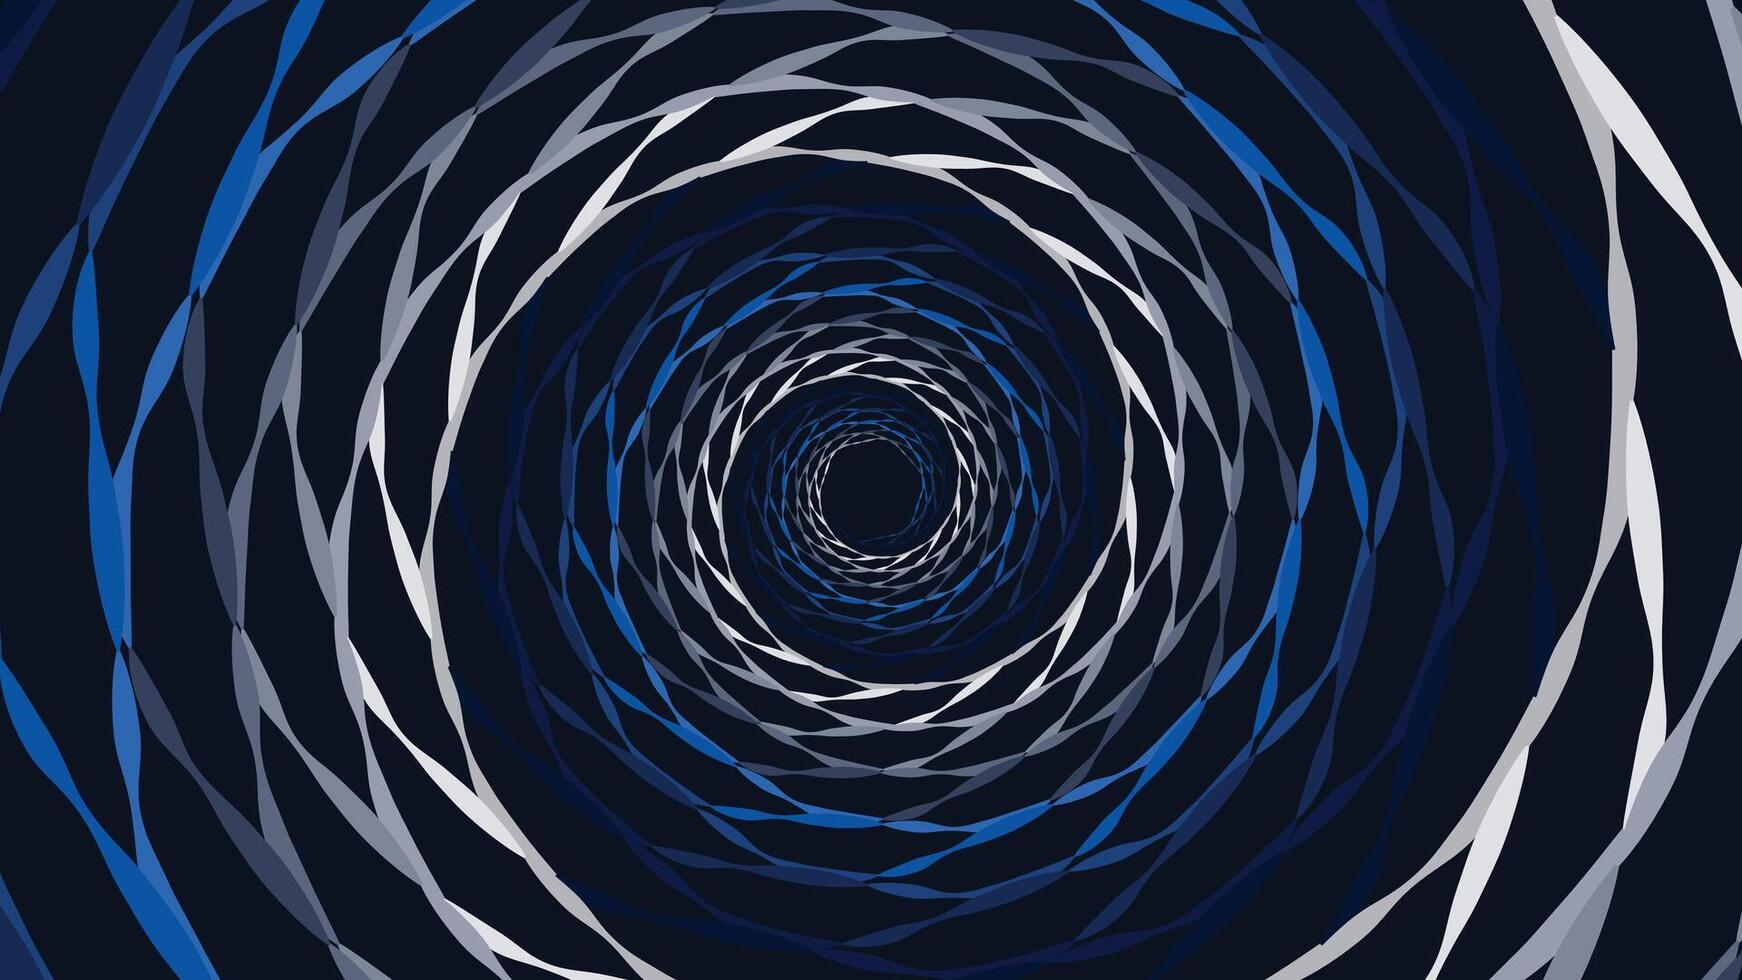 Abstarct spiral round vortex style creative data center background in dark blue color. This minimalist background can be used as a banner or wallpaper.It also can be presented as urgency. vector